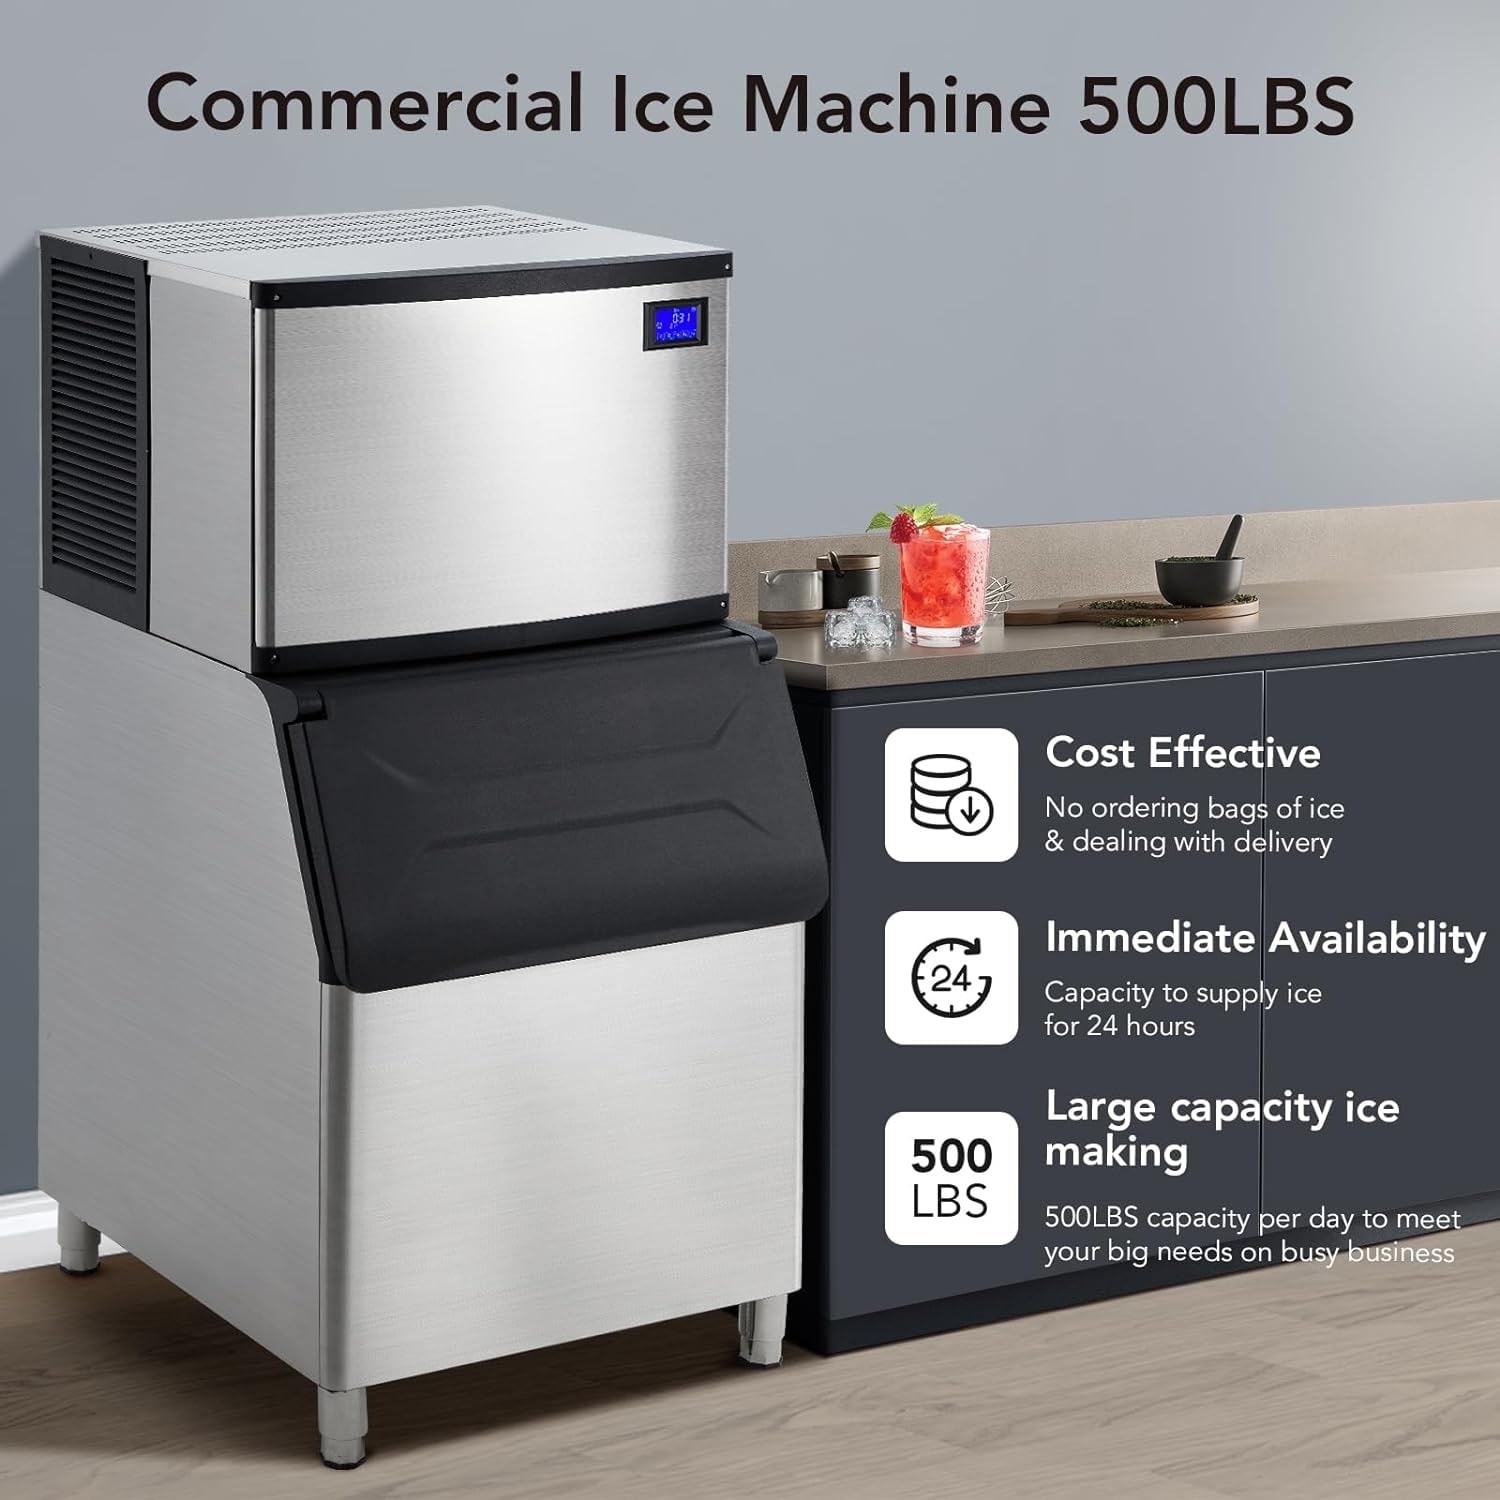 IGLOO® 26-Pound Automatic Self-Cleaning Portable Countertop Ice Maker  Machine With Handle, Aqua